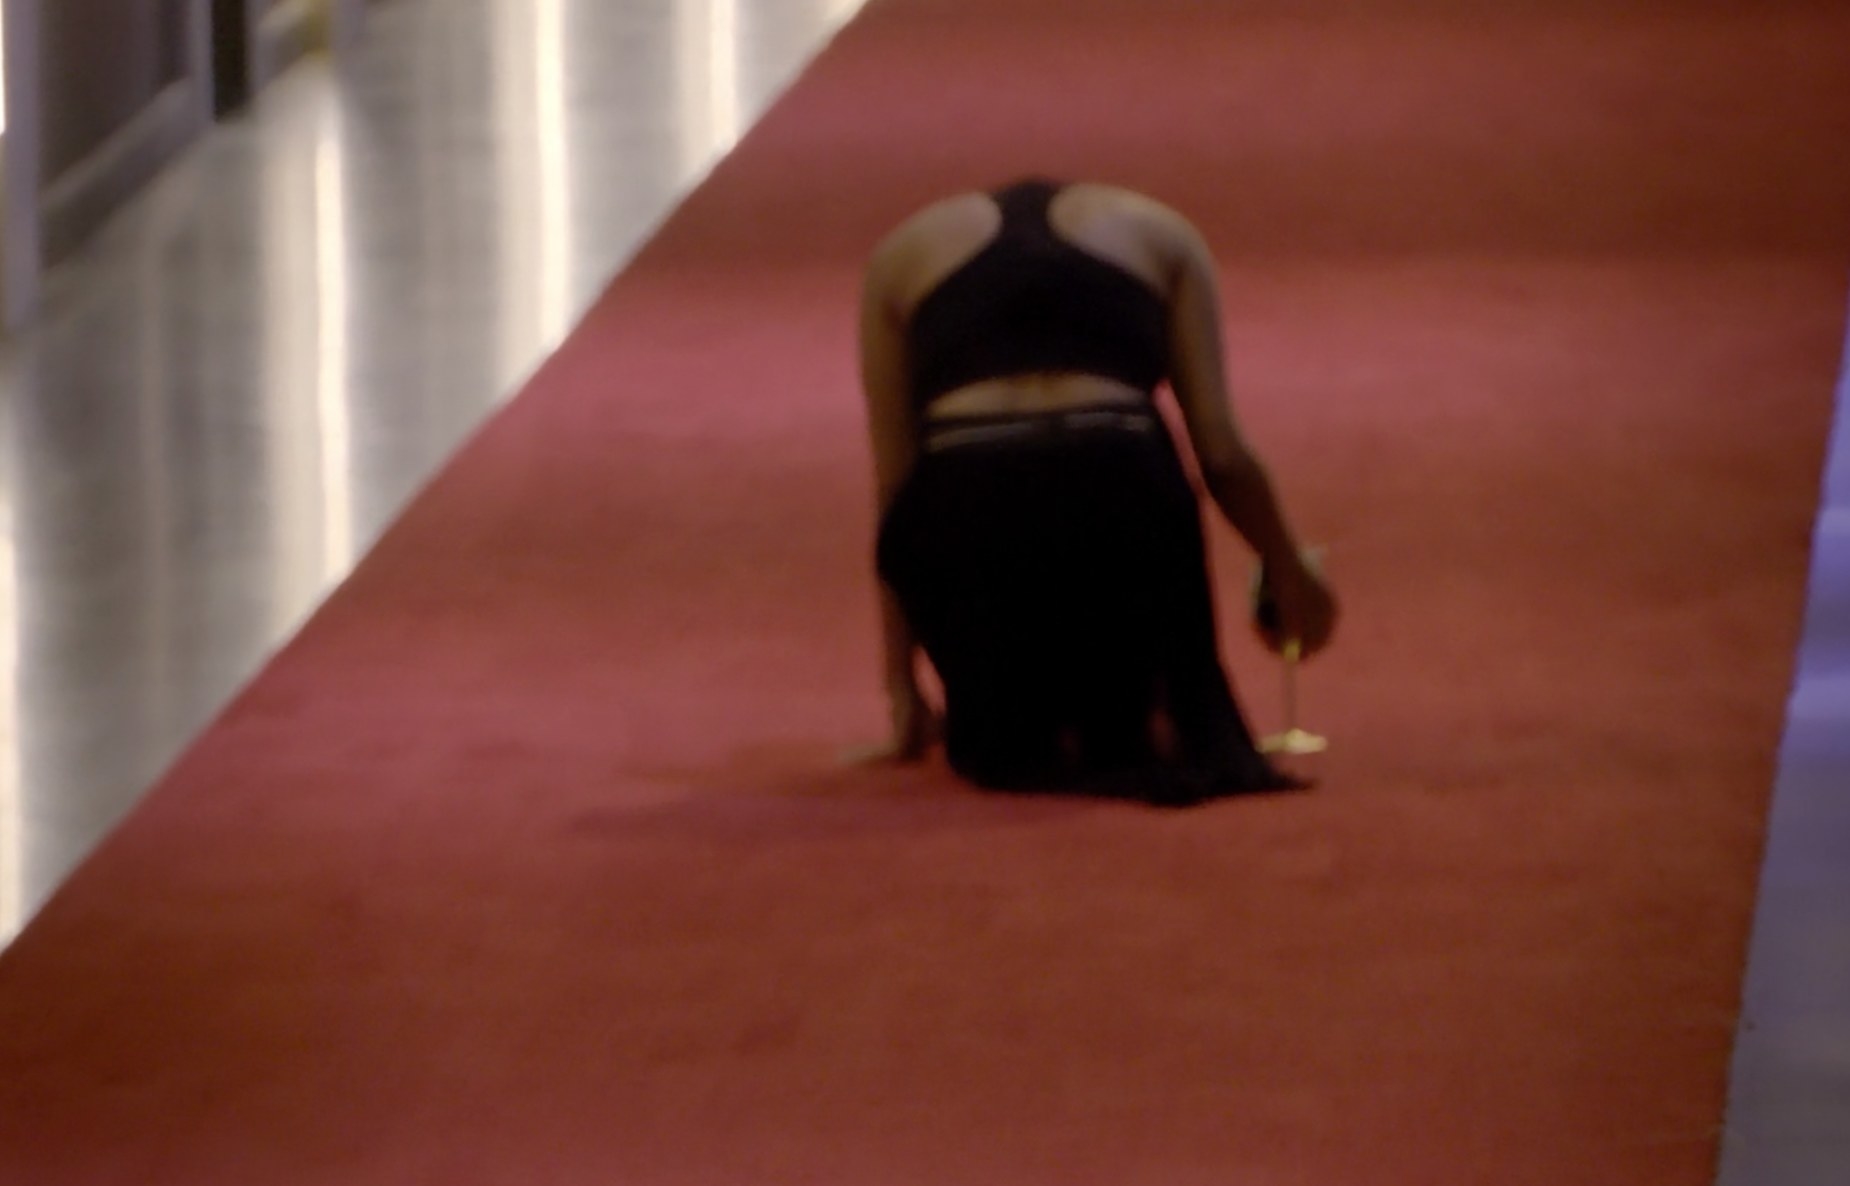 Iyana from behind kneeling on the floor in sadness